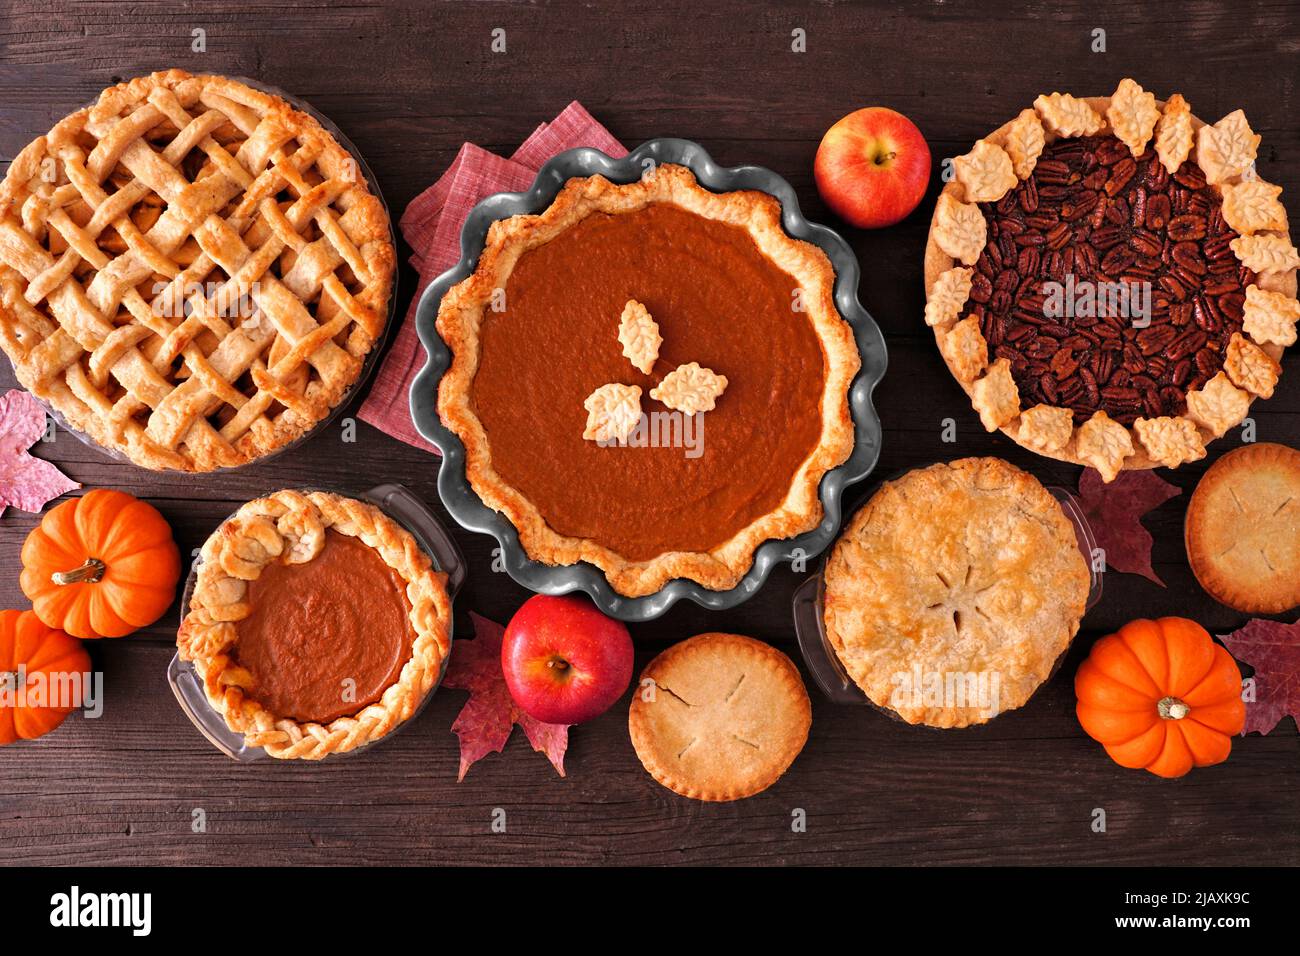 Assortment of homemade fall pies. Apple, pumpkin and pecan. Top down view table scene on a dark wood background. Stock Photo